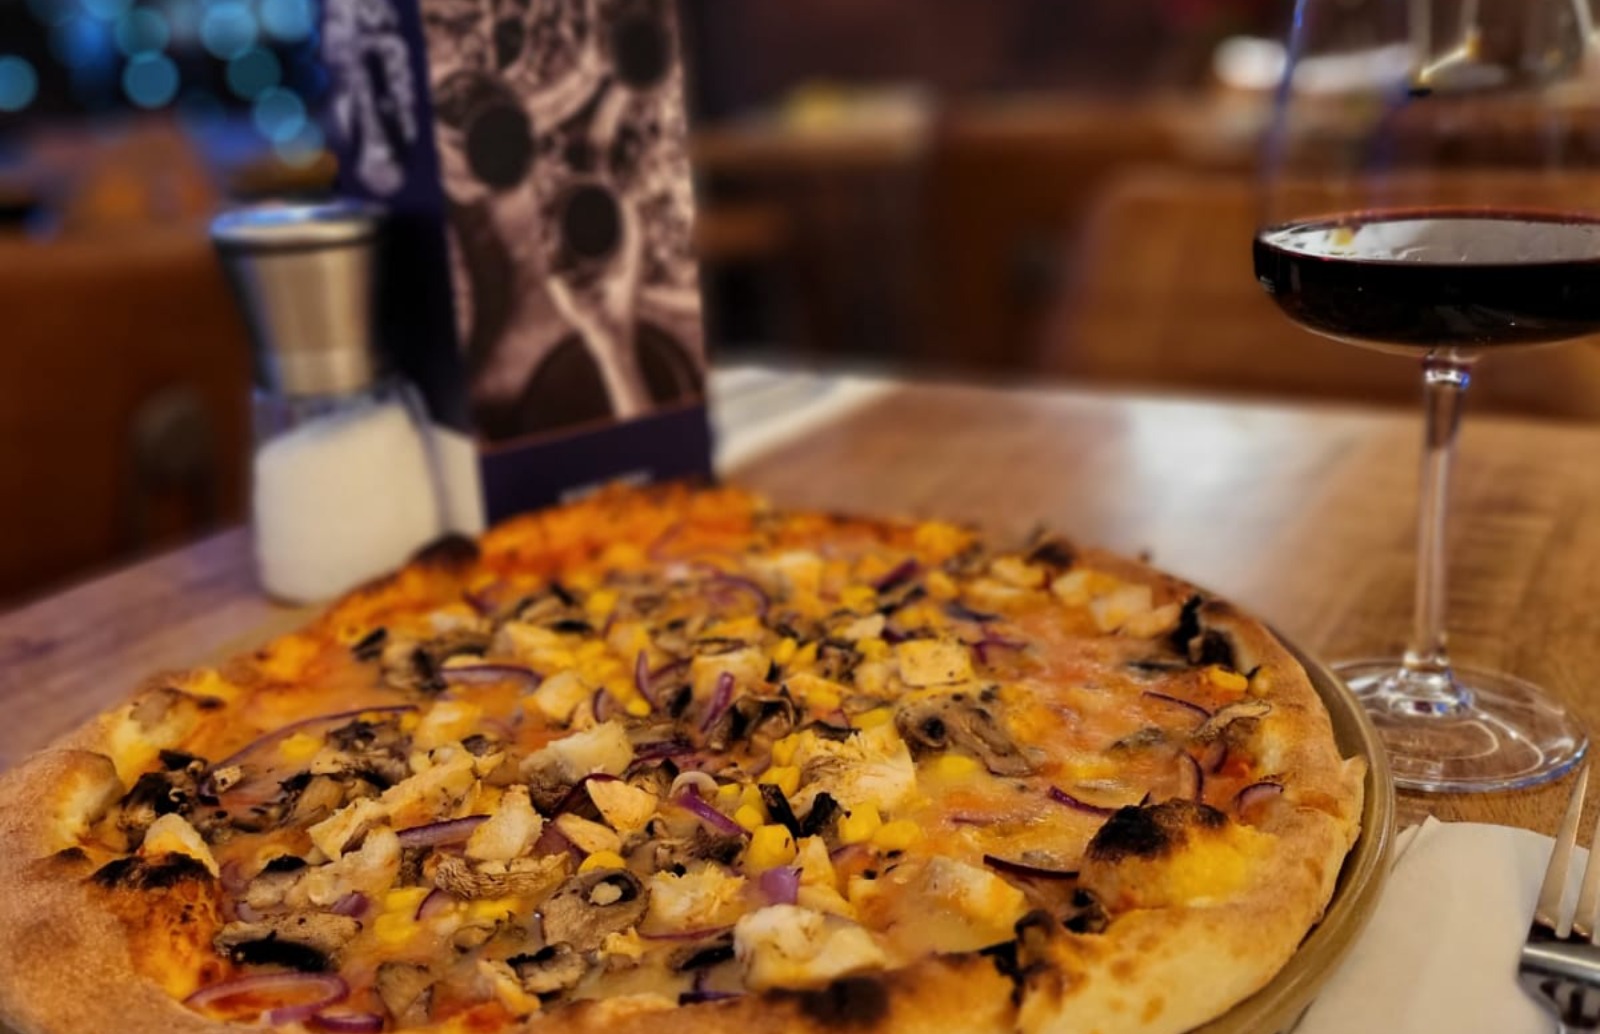 Fresh pizza brought to table with wine